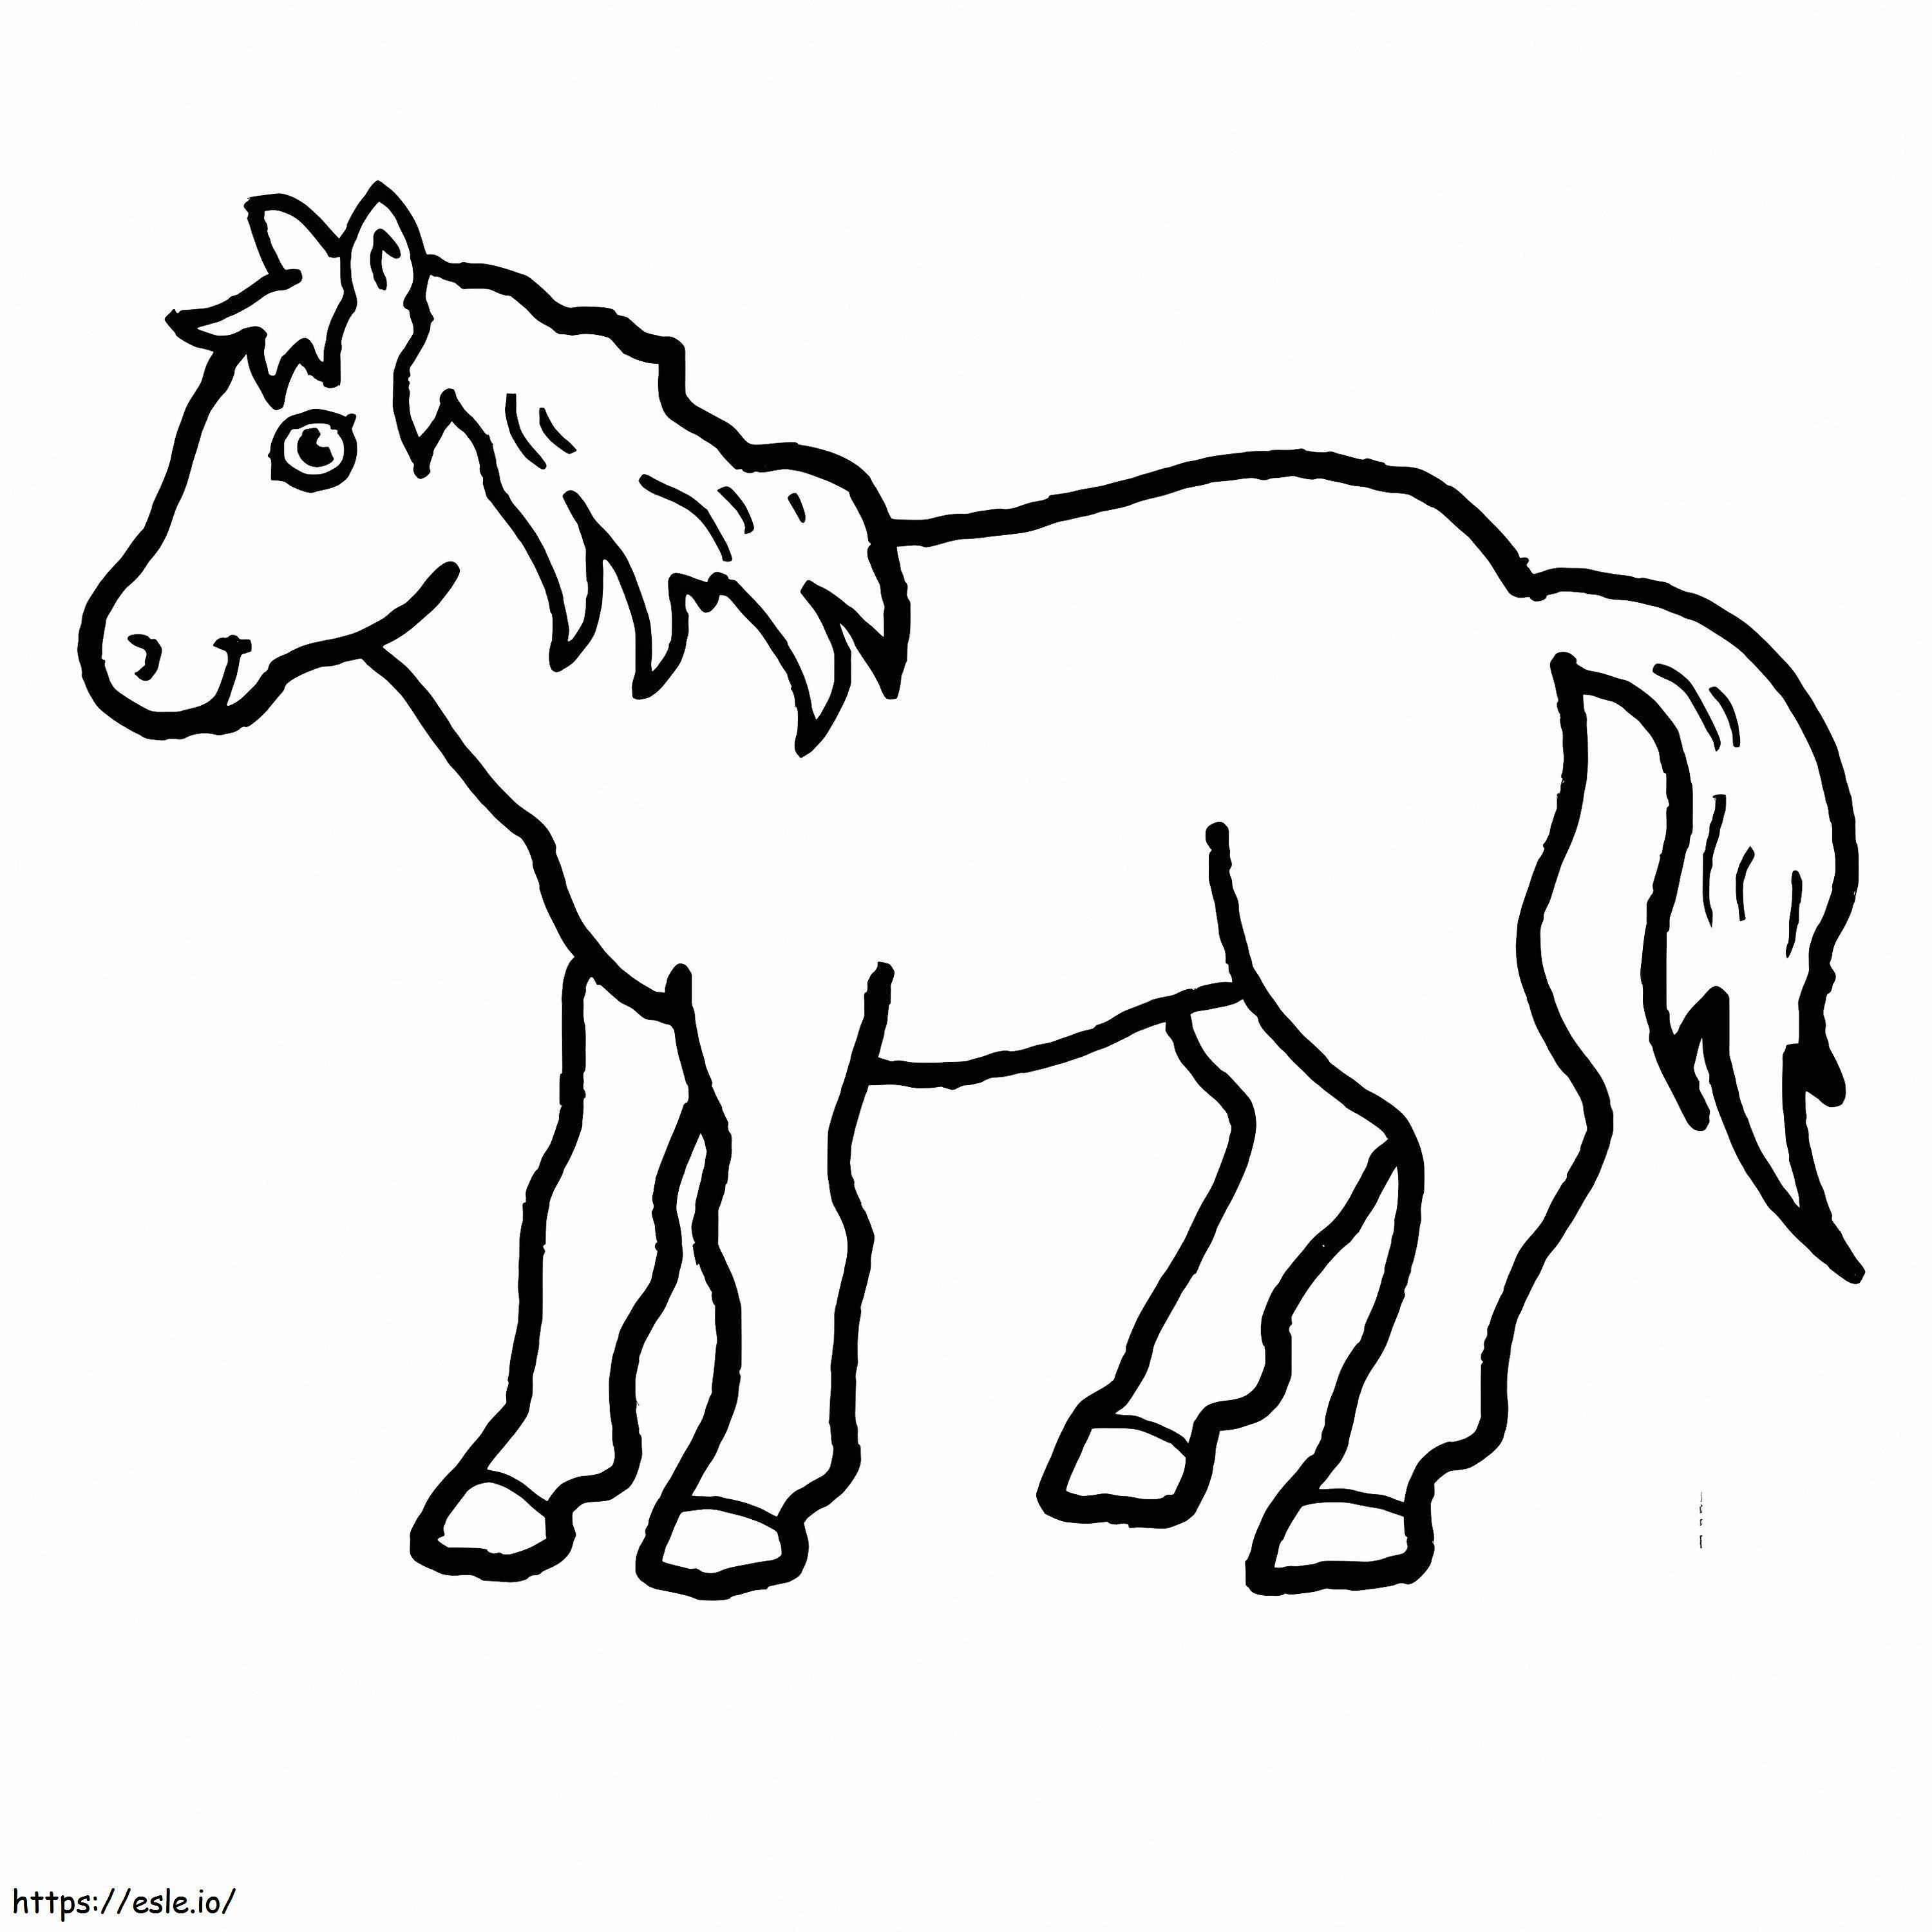 Normal Horse coloring page